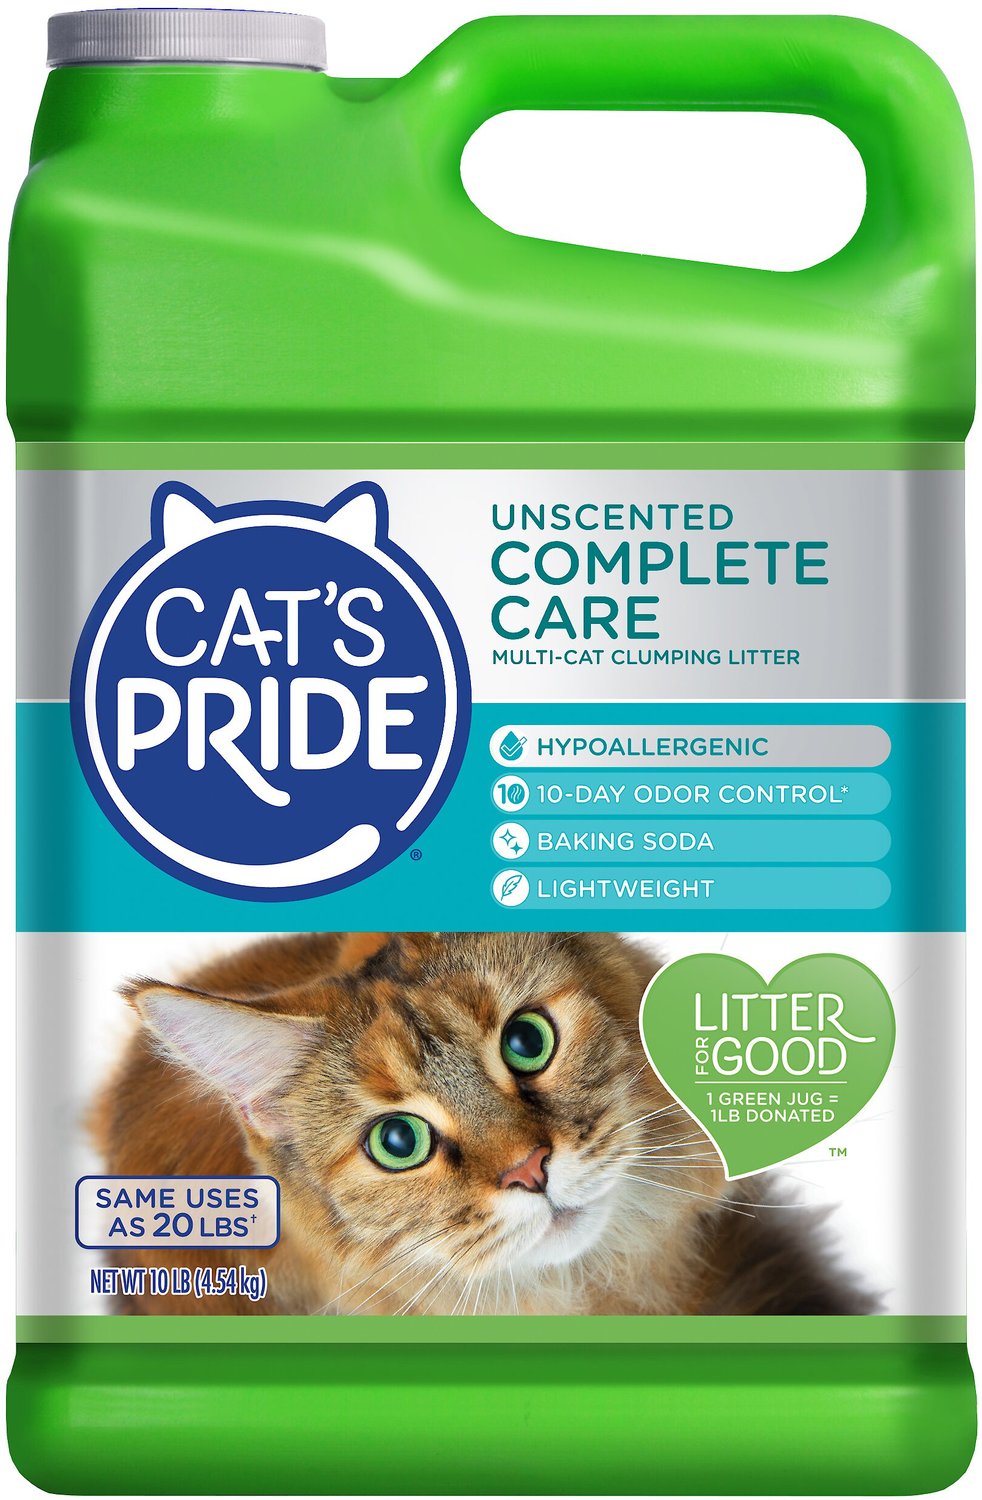 Cat's Pride Complete Care Unscented MultiCat Clumping Litter, 10lb